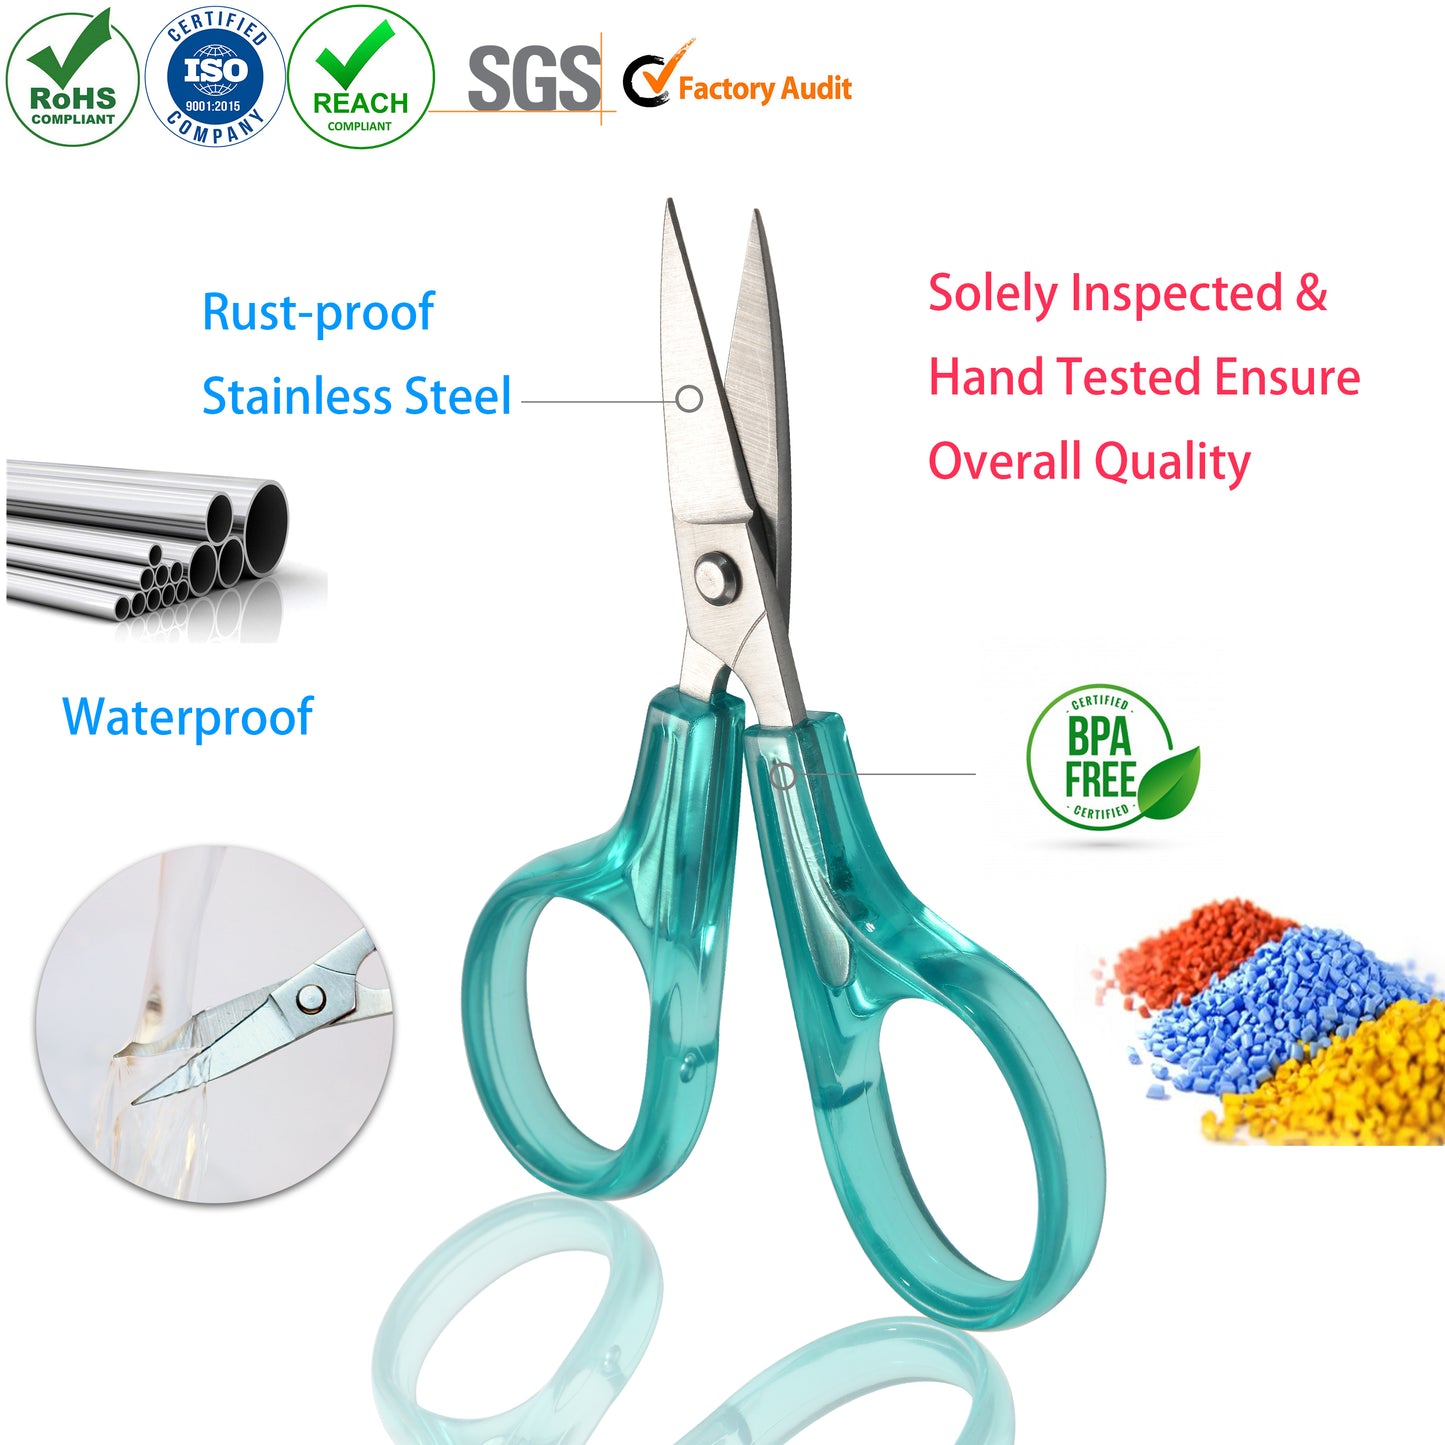 PAFASON Sharpest and Precise Stainless Steel Curved & Straight Thread Cutting Scissors with Protective Cover - Ideal for Embroidery, Quilting, Sewing